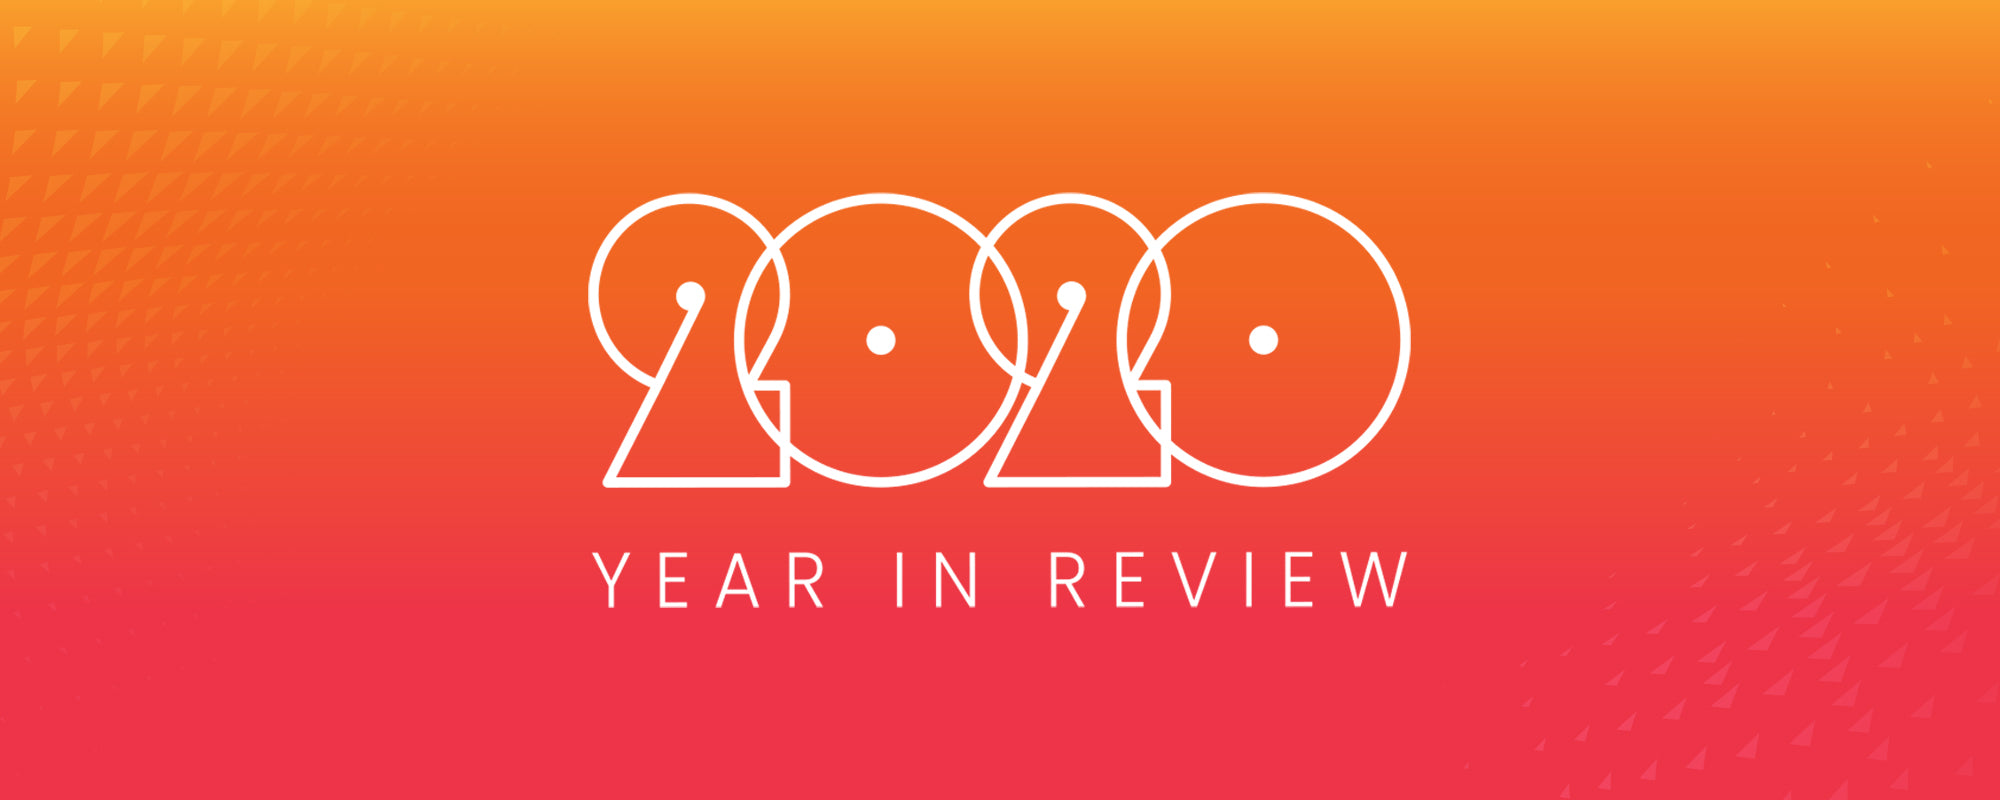 AfterShokz 2020 Year in Review report